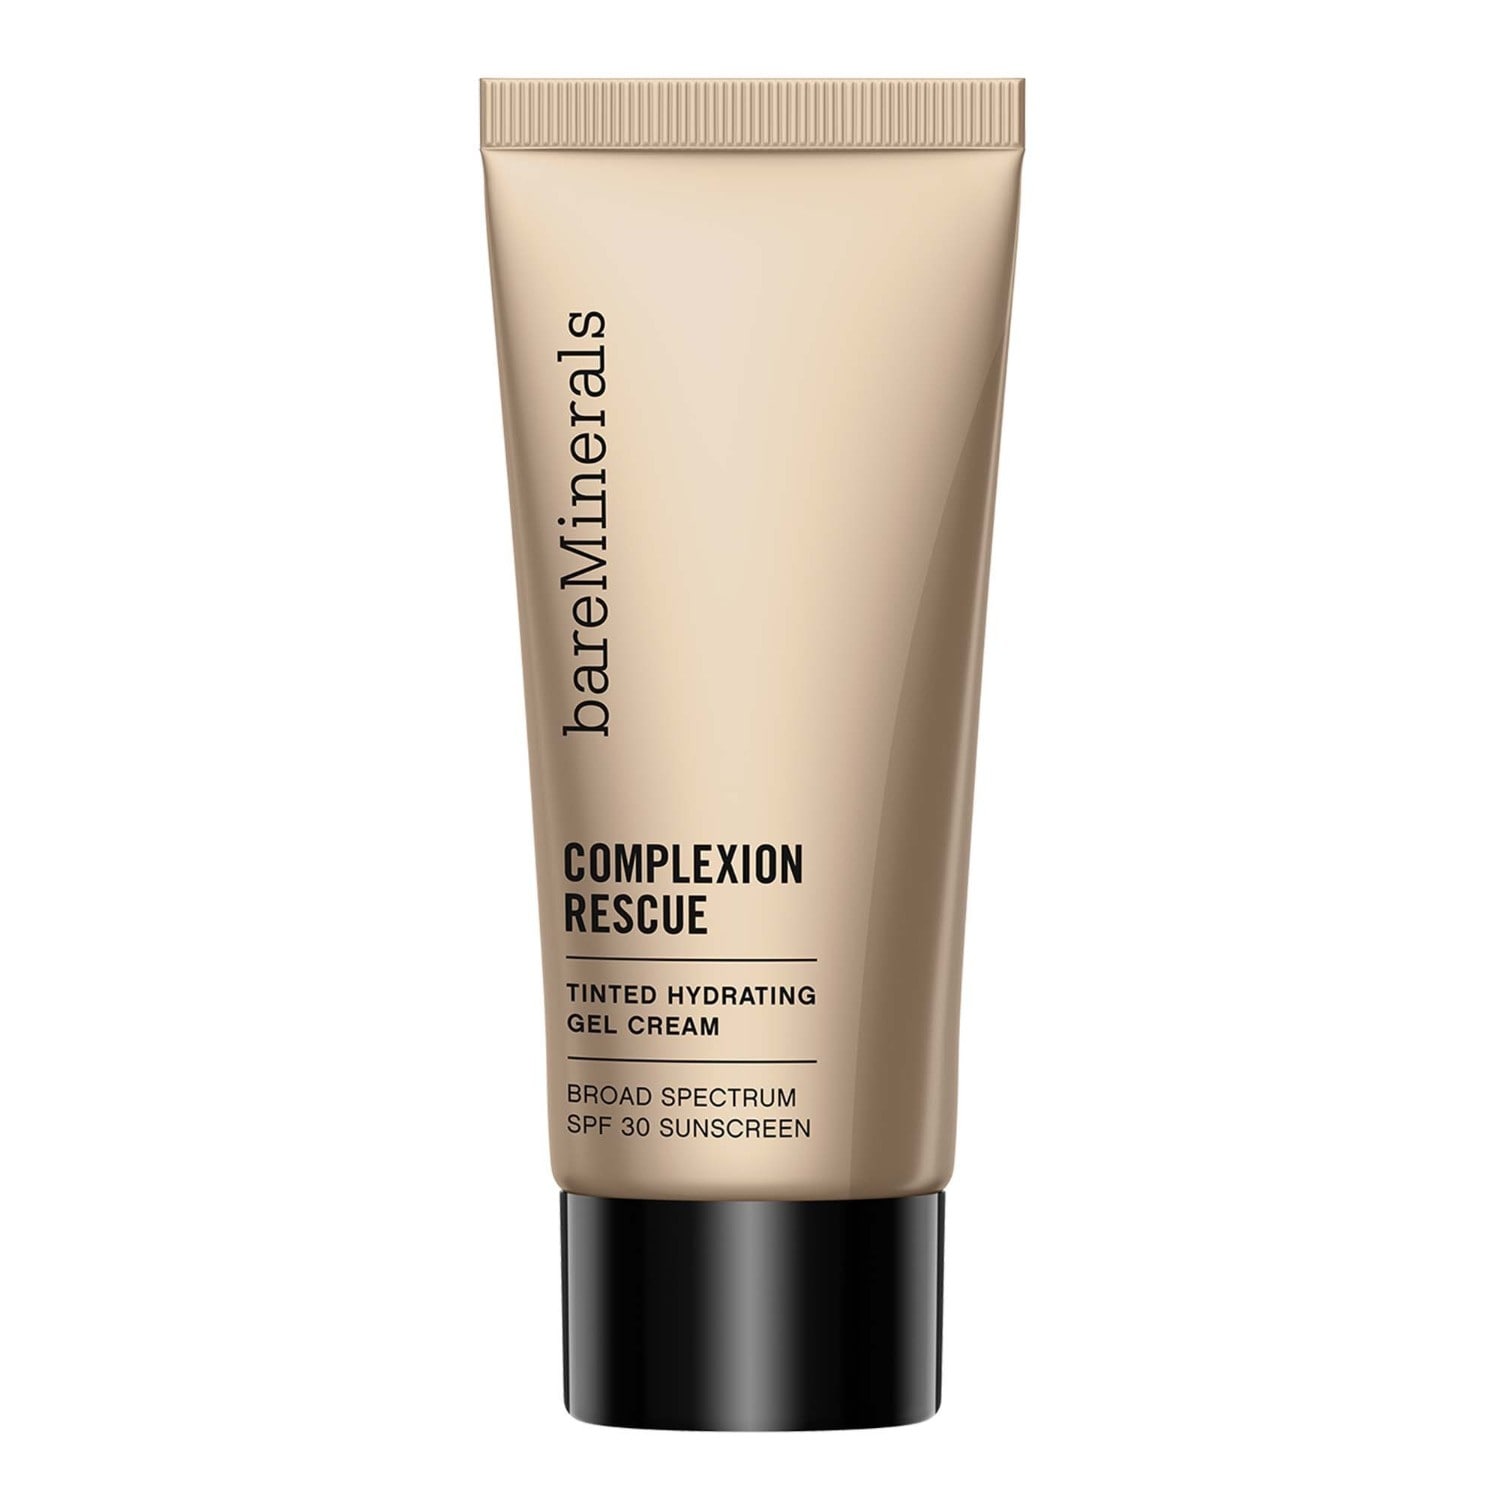 bareMinerals Complexion Rescue Tinted Hydrating Gel Cream - Travelsize, Tan